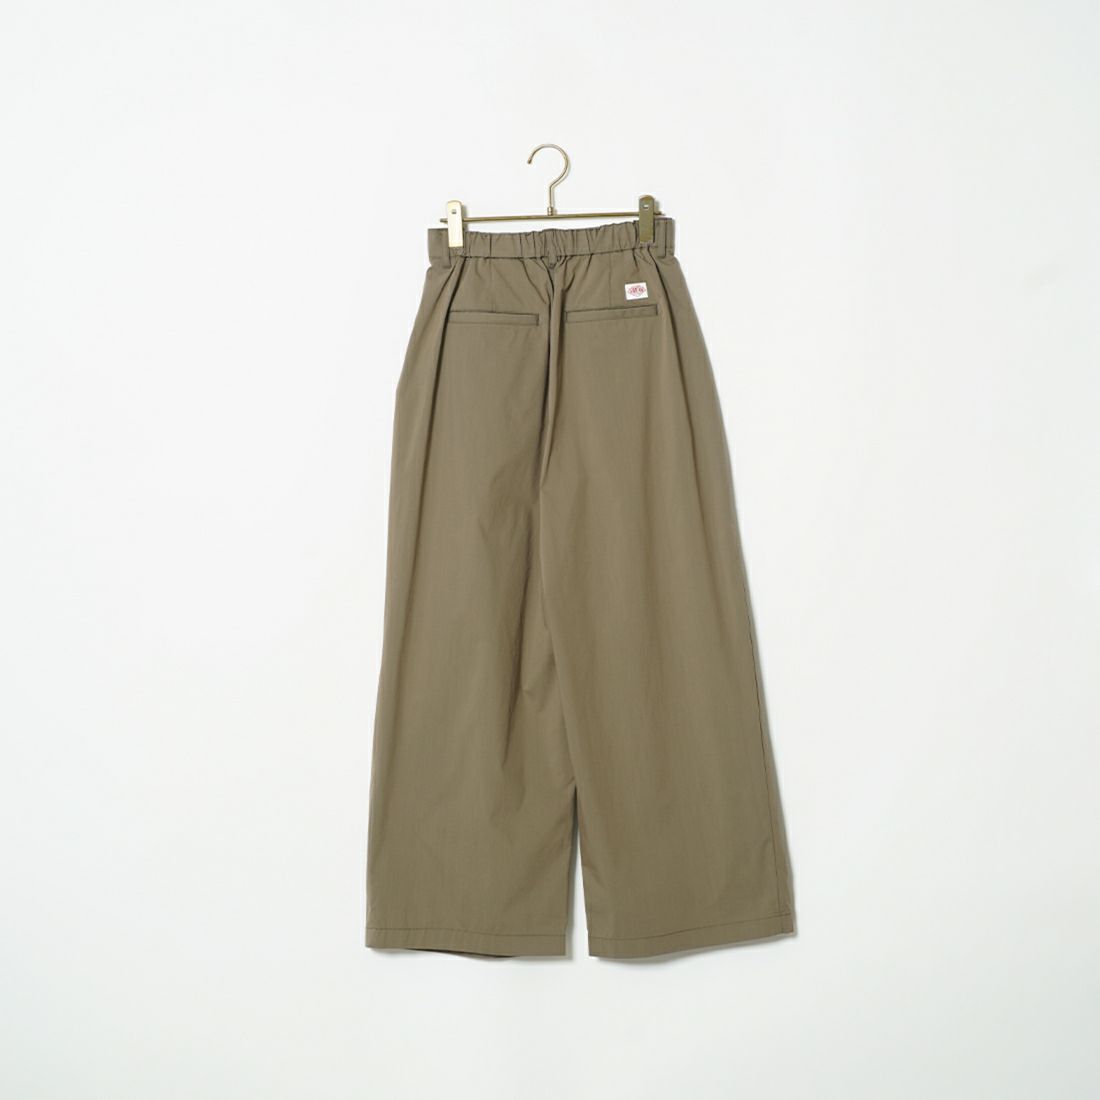 DANTON [ダントン] 2TUCK WIDE PANTS [DT-E0170CPY] TAUPE